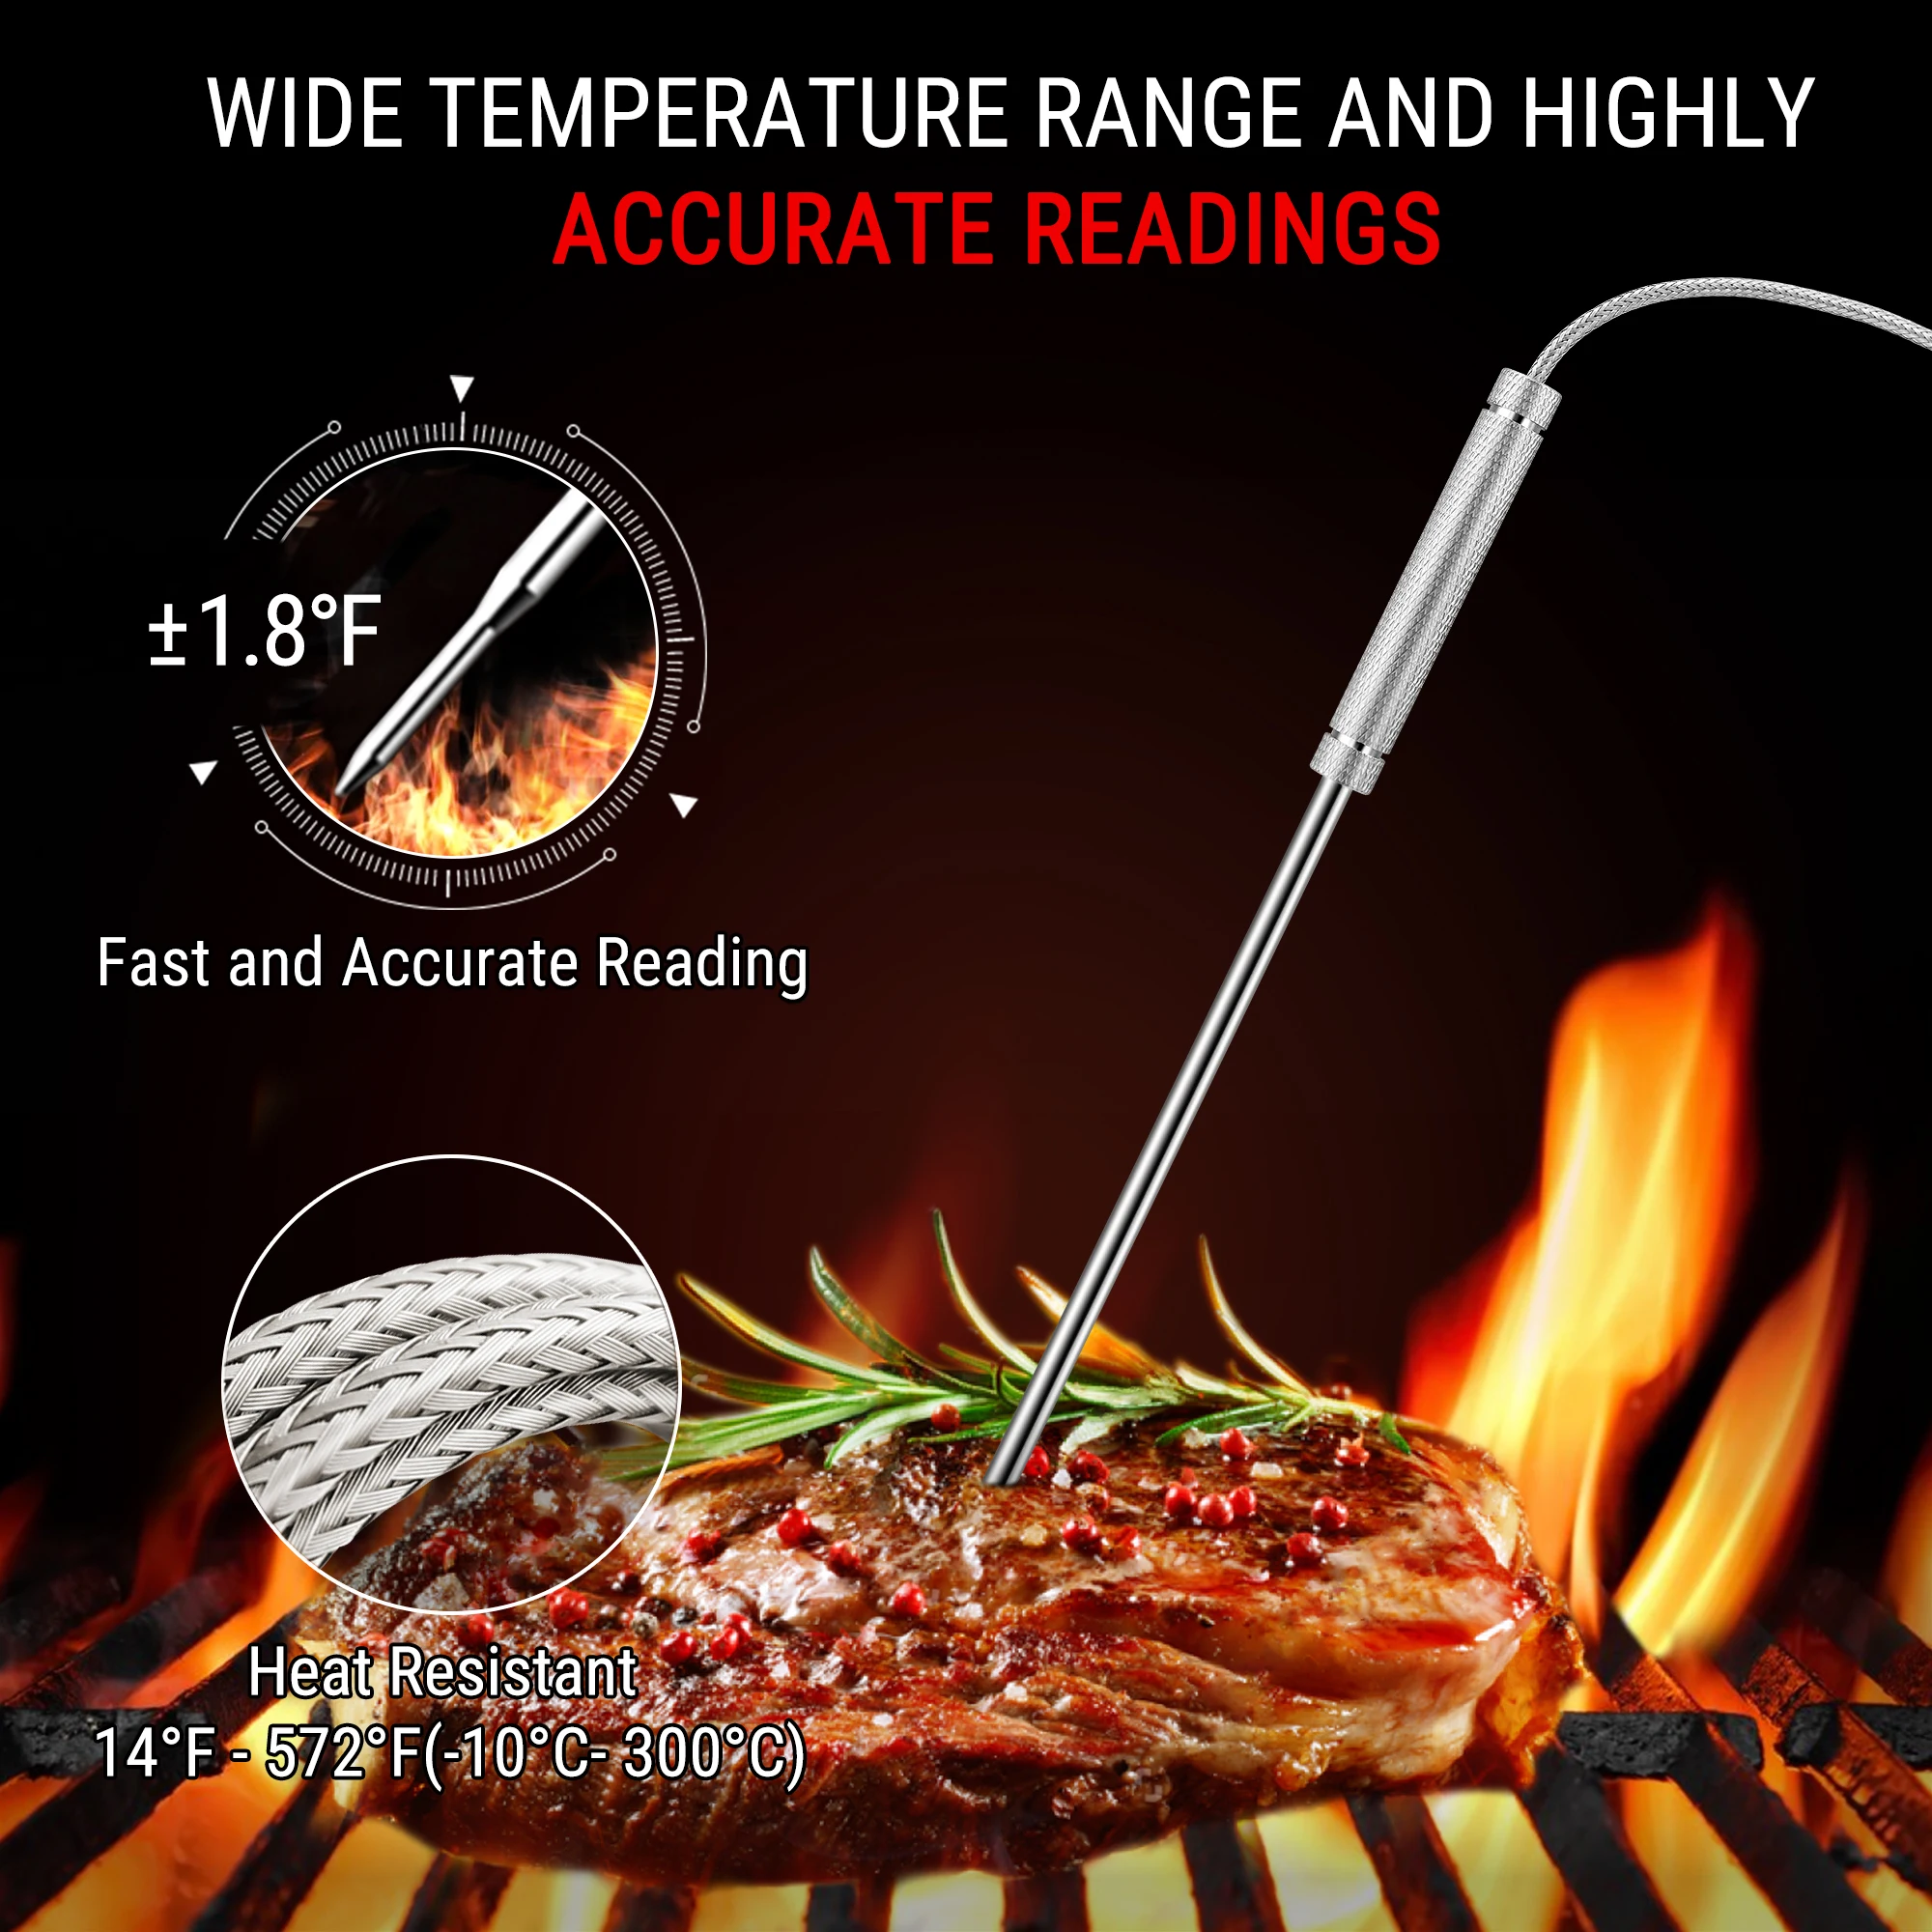 ThermoPro TP27C 4 Meat Probes 150M Wireless Digital Thermometer